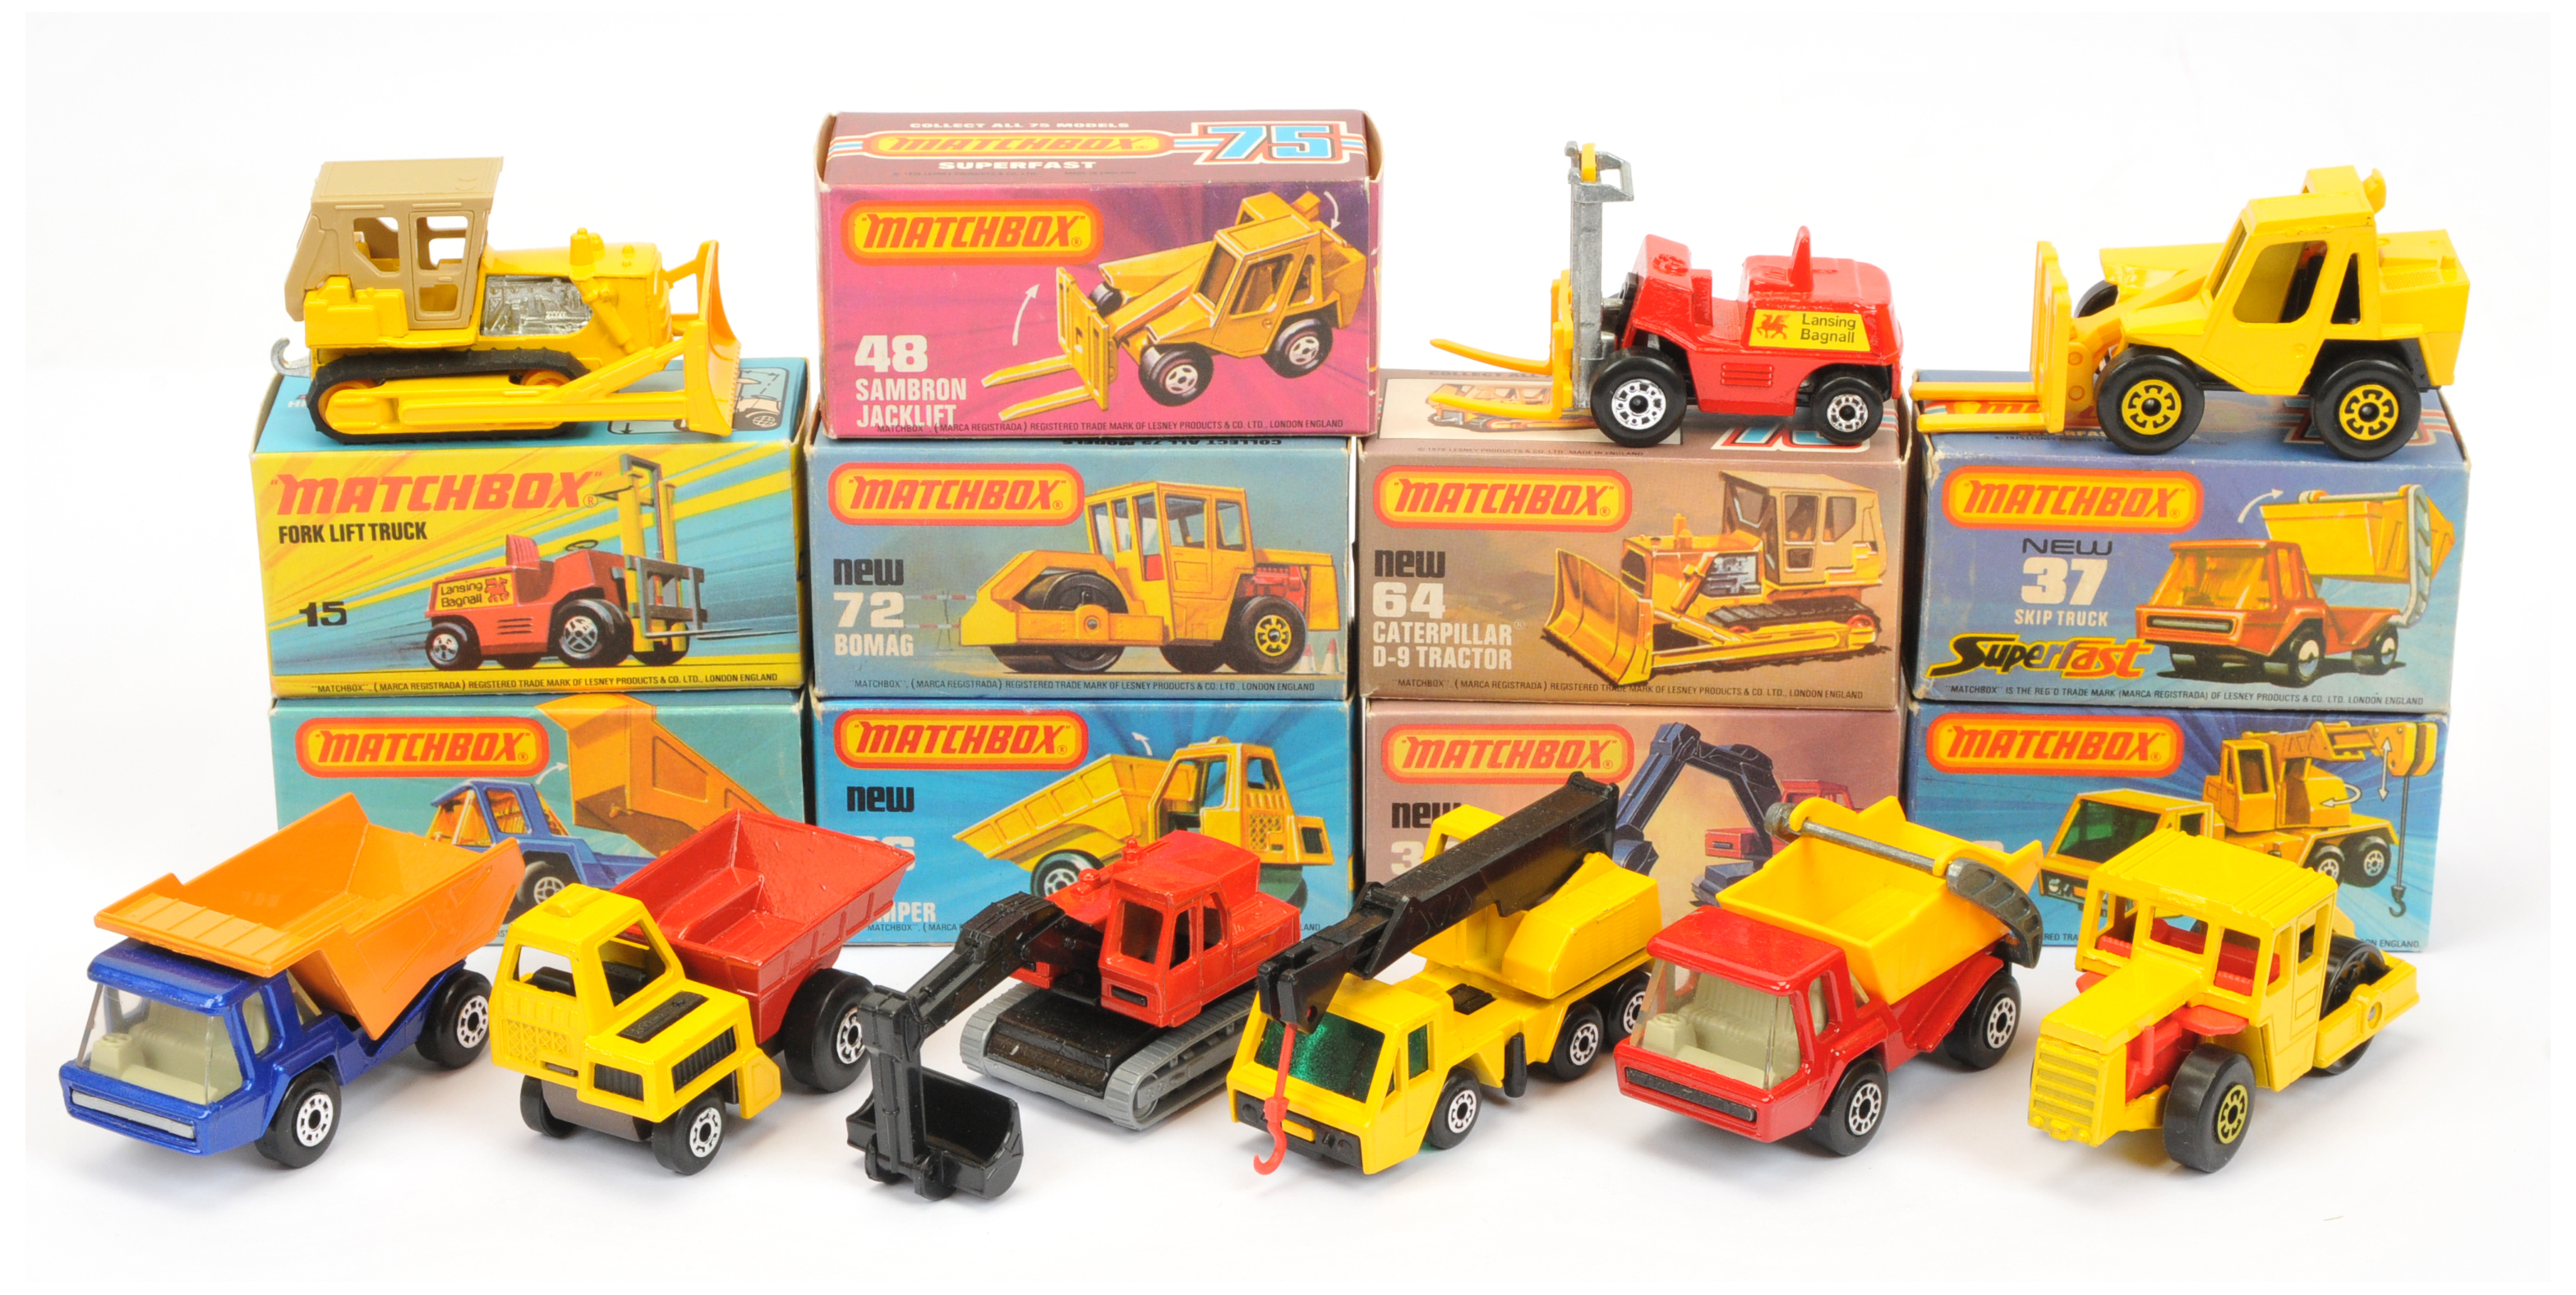 Matchbox Superfast Group Of 9 Construction Related To Include  -15b Fork Lift Truck - red, 23b at...